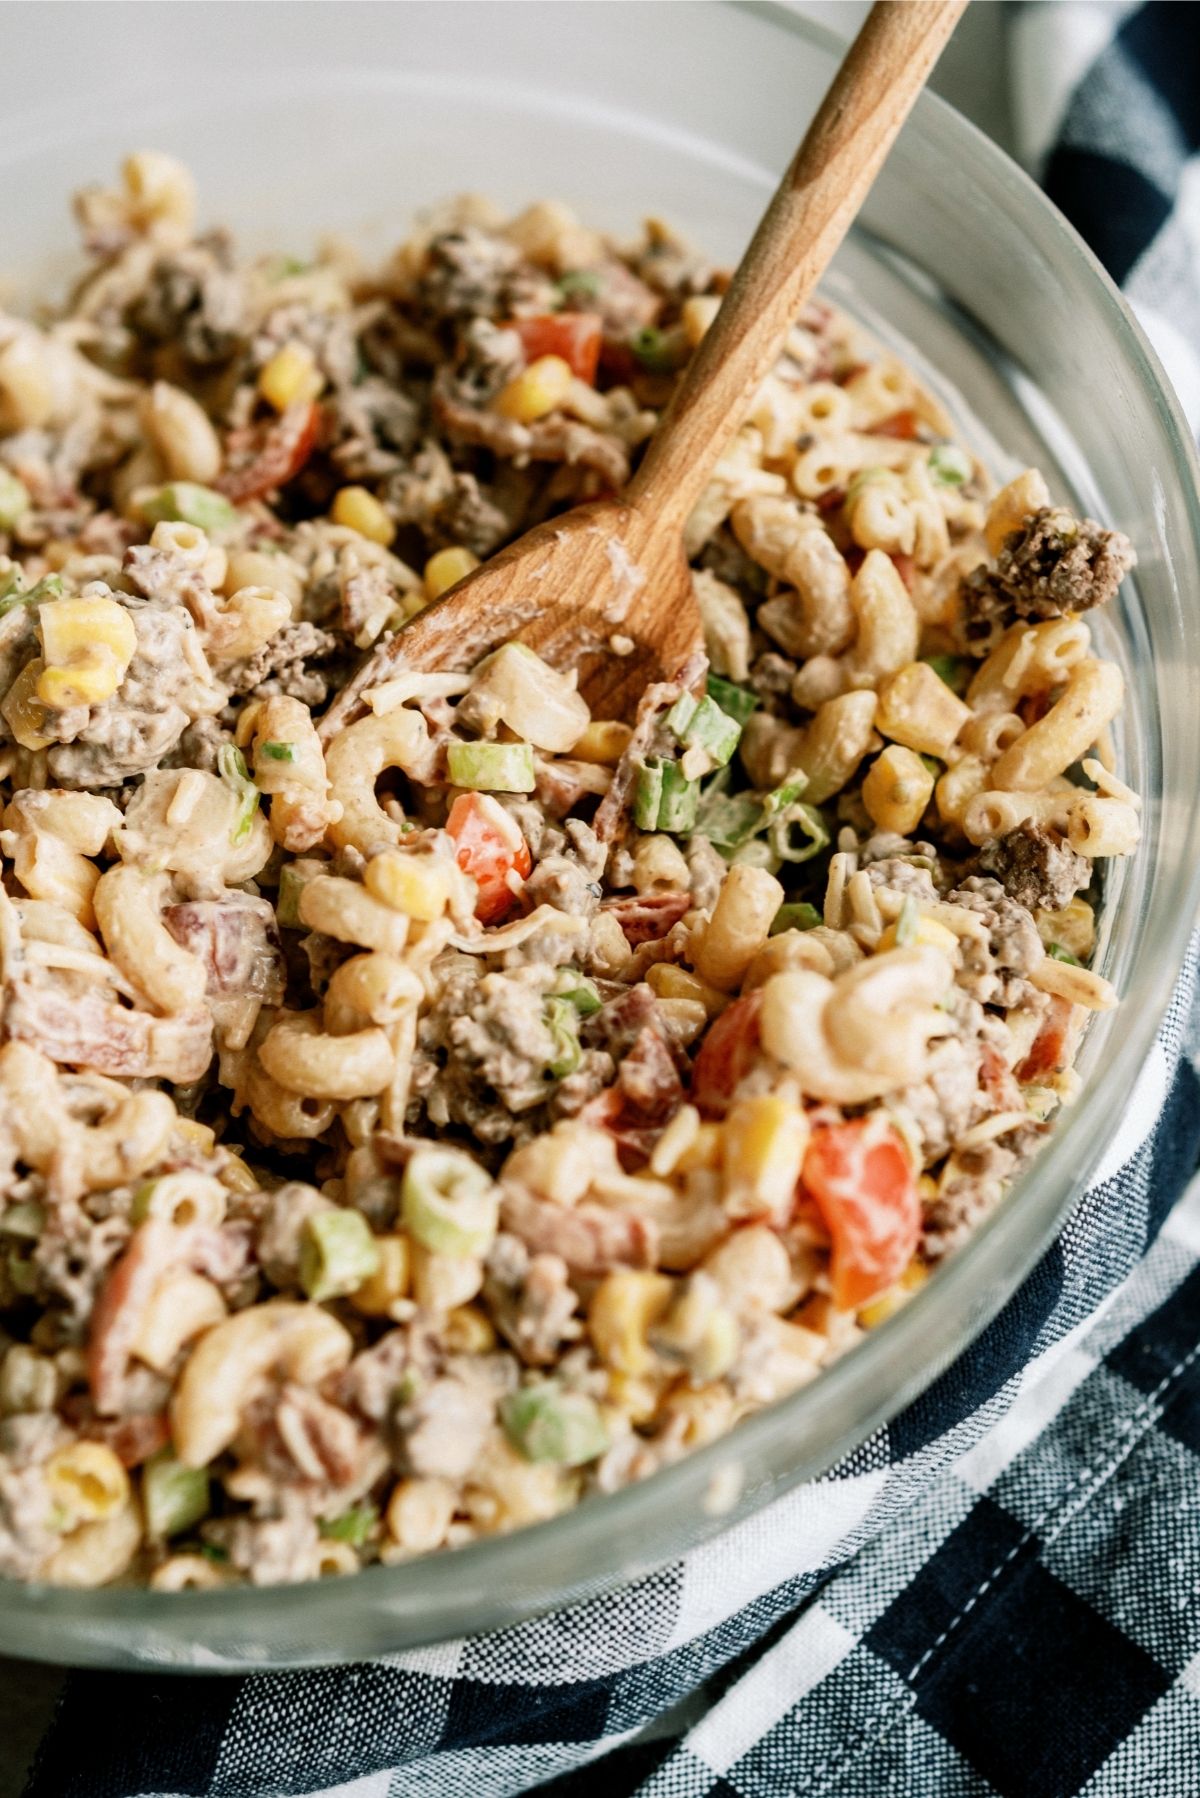 Cowboy Pasta Salad in a glass bowl with a wooden spoon